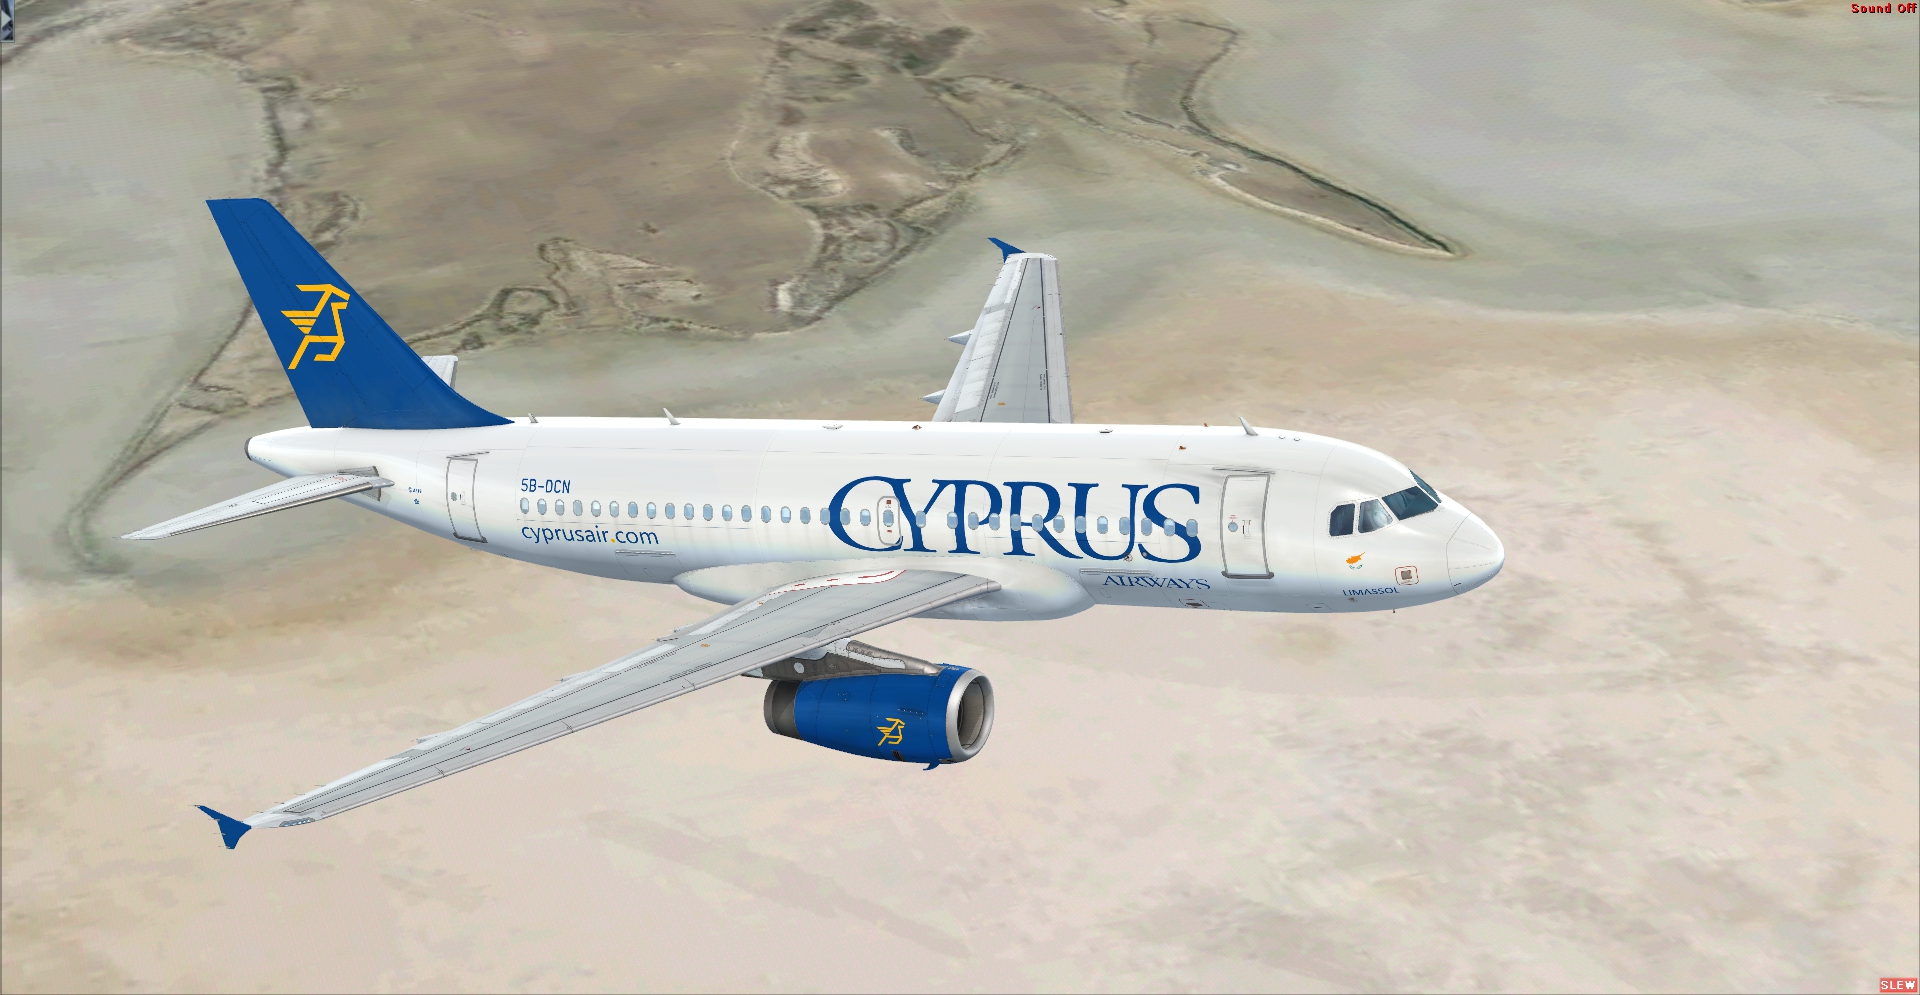 More information about "A319 IAE Cyprus 5B-DCN"